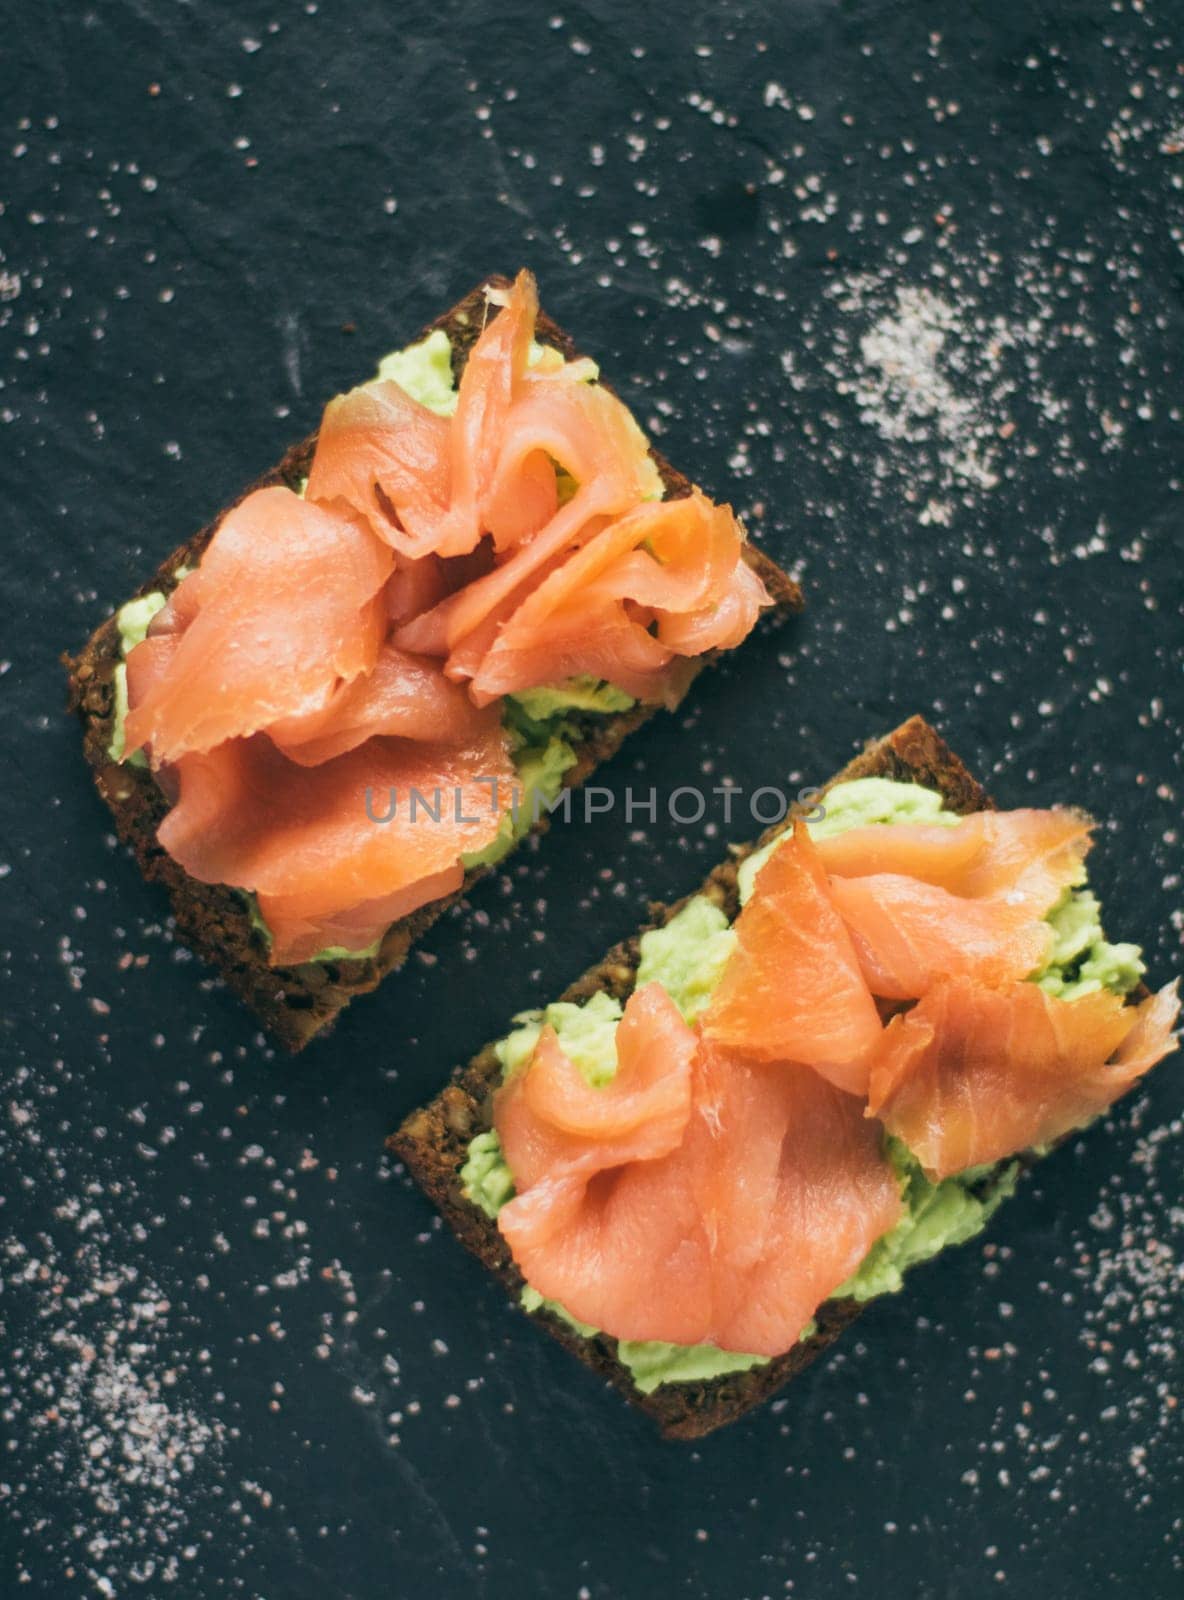 smoked salmon sandwich - healthy snacks and homemade food styled concept by Anneleven